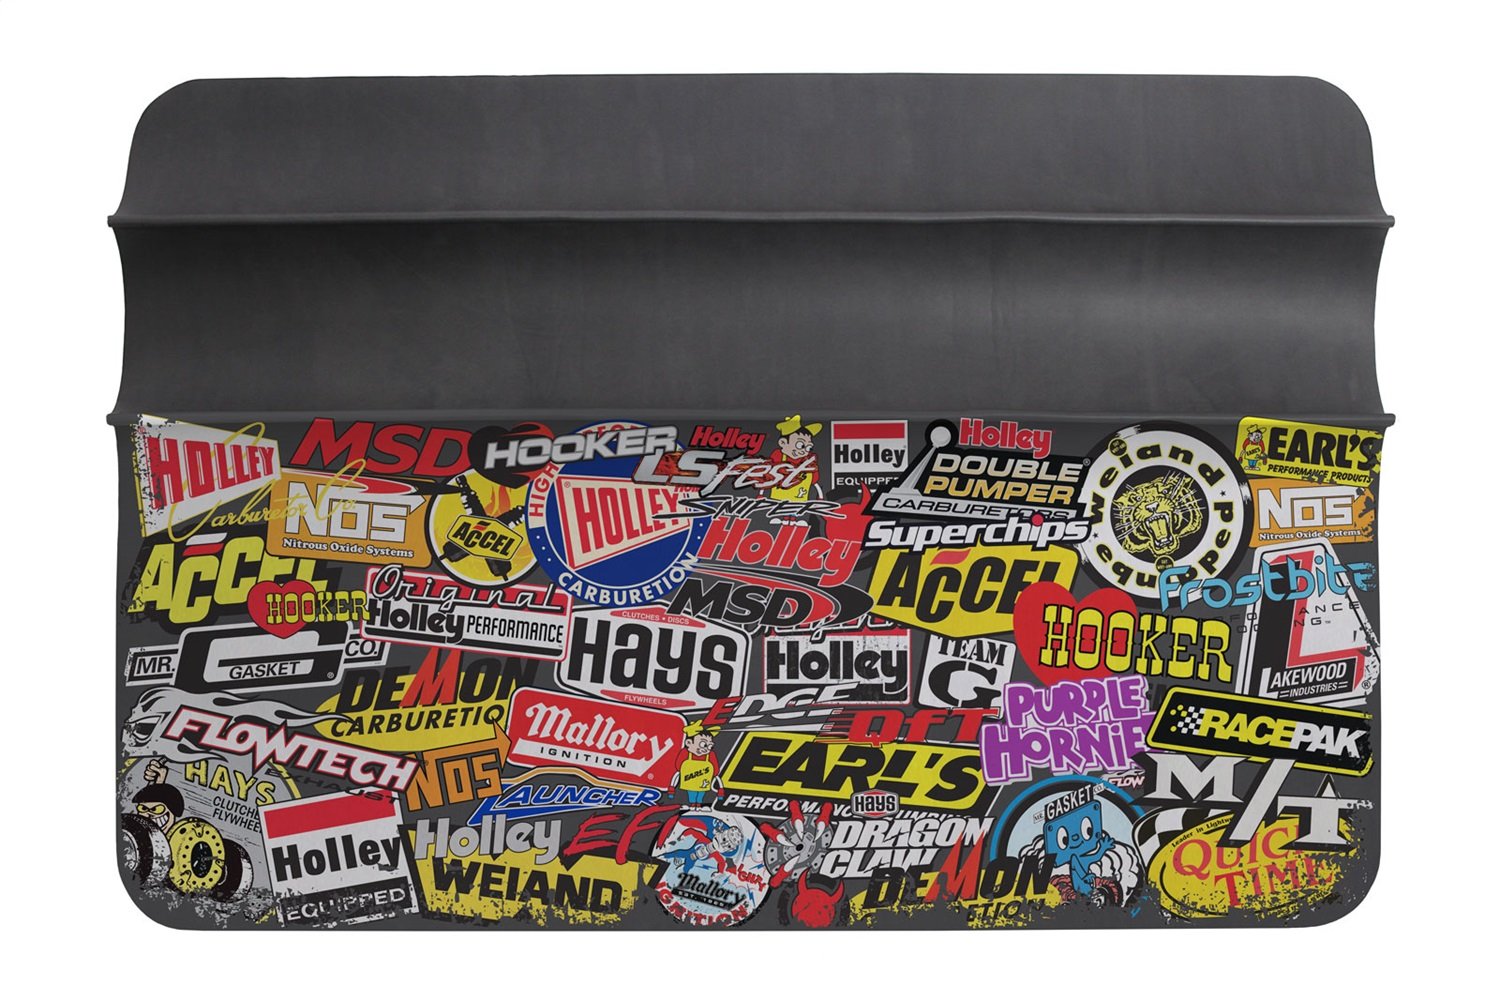 Sticker Bomb Fender Cover with Holley/MSD Brand Logos